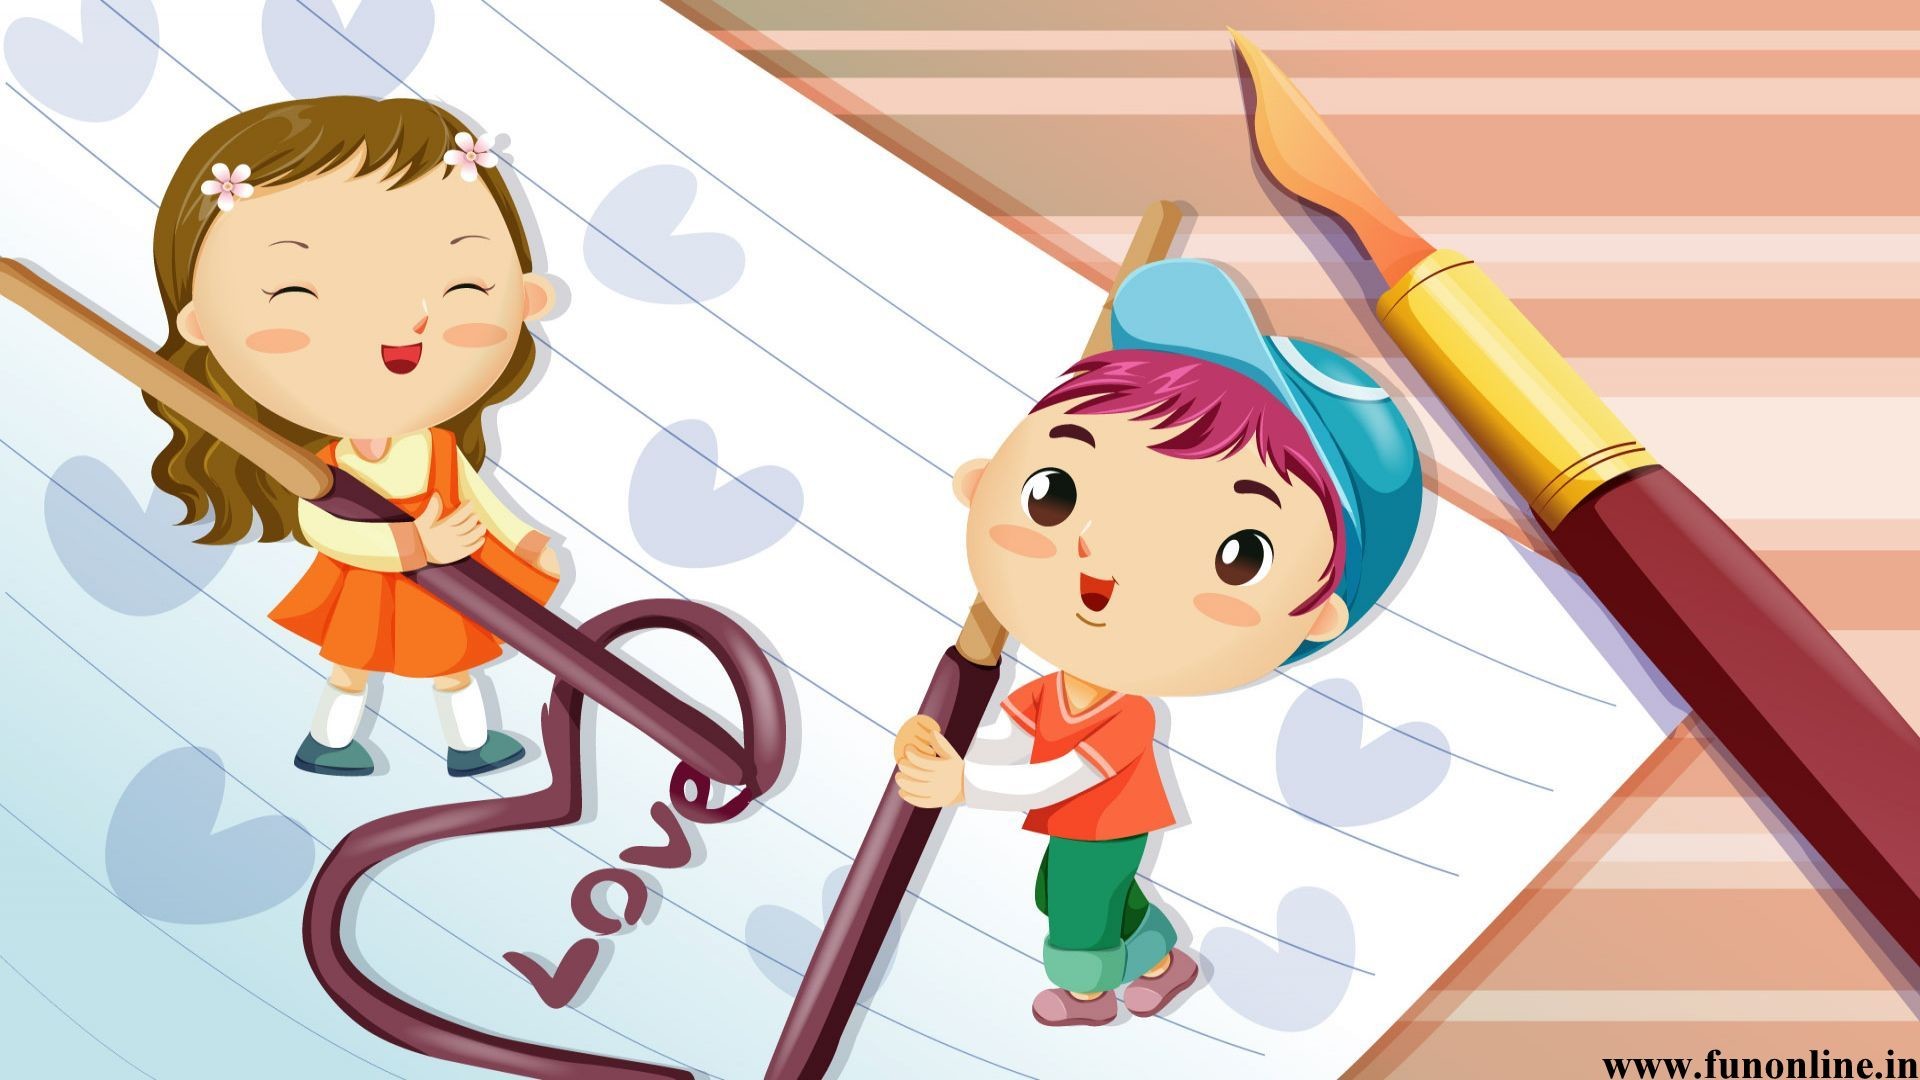 1920x1080 Cartoon Love Wallpapers, Charming Cartoon Love HD Wallpapers For Free